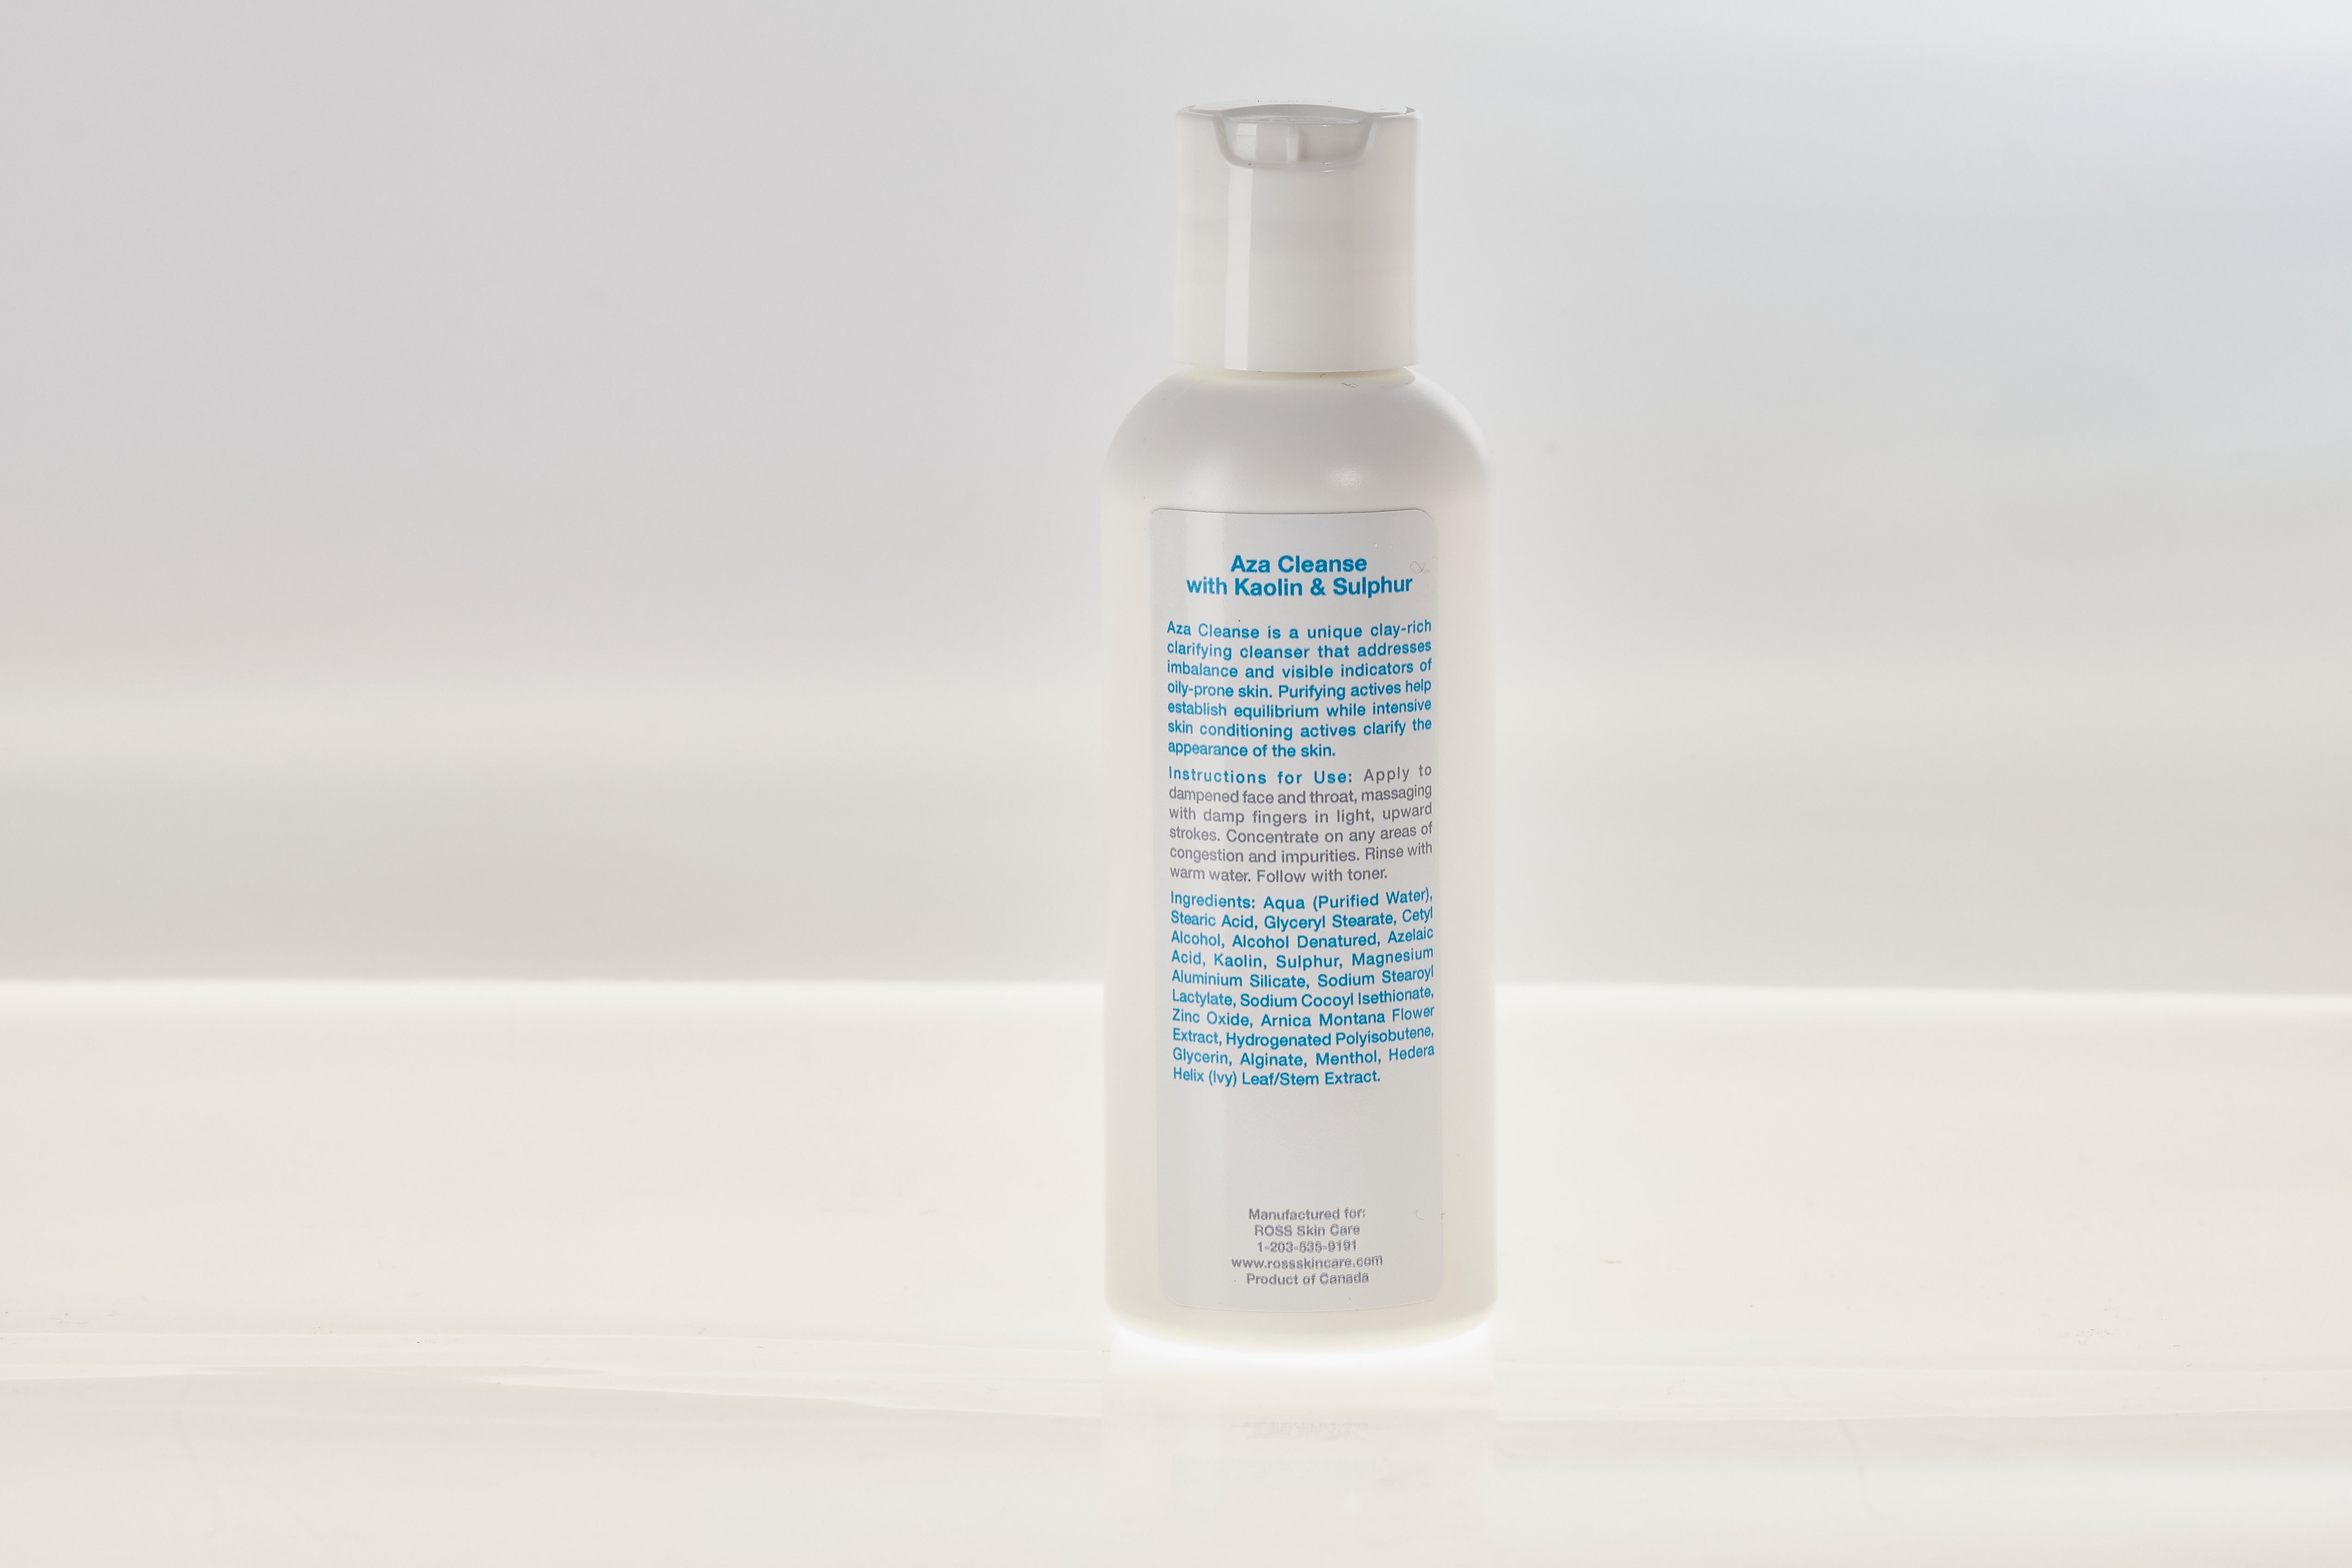 Aza Cleanse With Kaolin and Sulphur